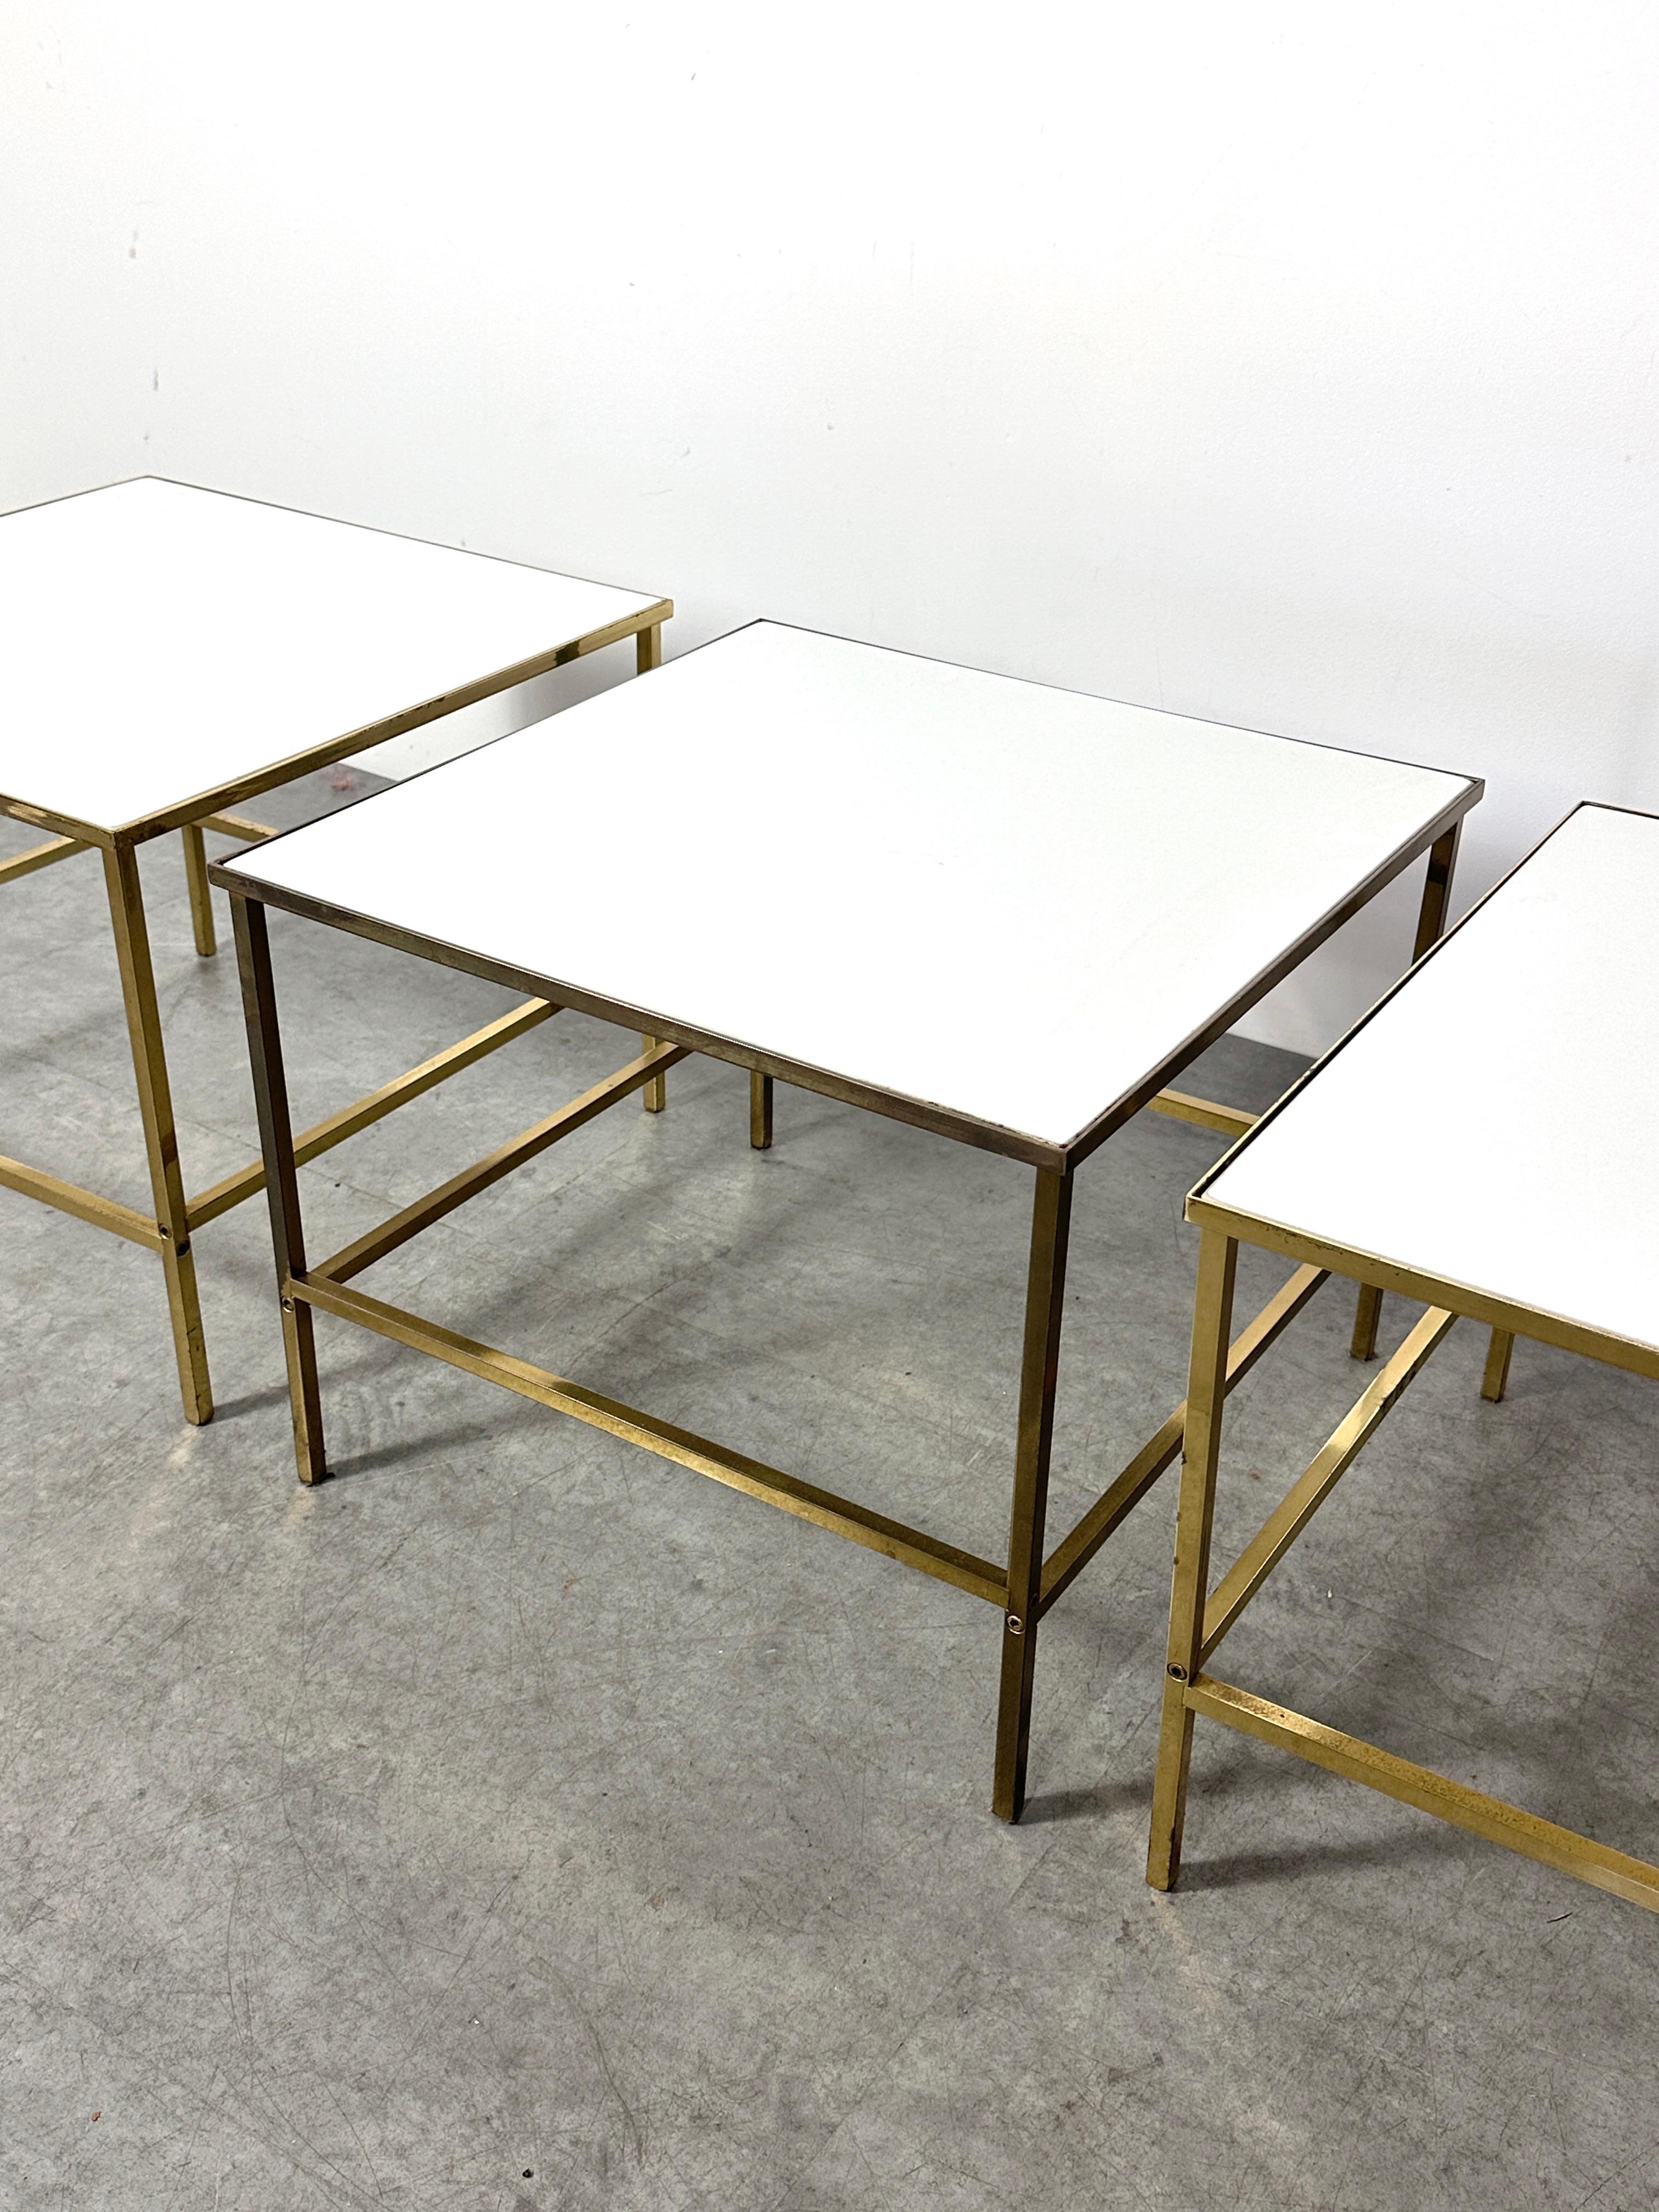 Three Brass & Vitrolite Square Side Tables by Harvey Probber 1950s Mid Century For Sale 3